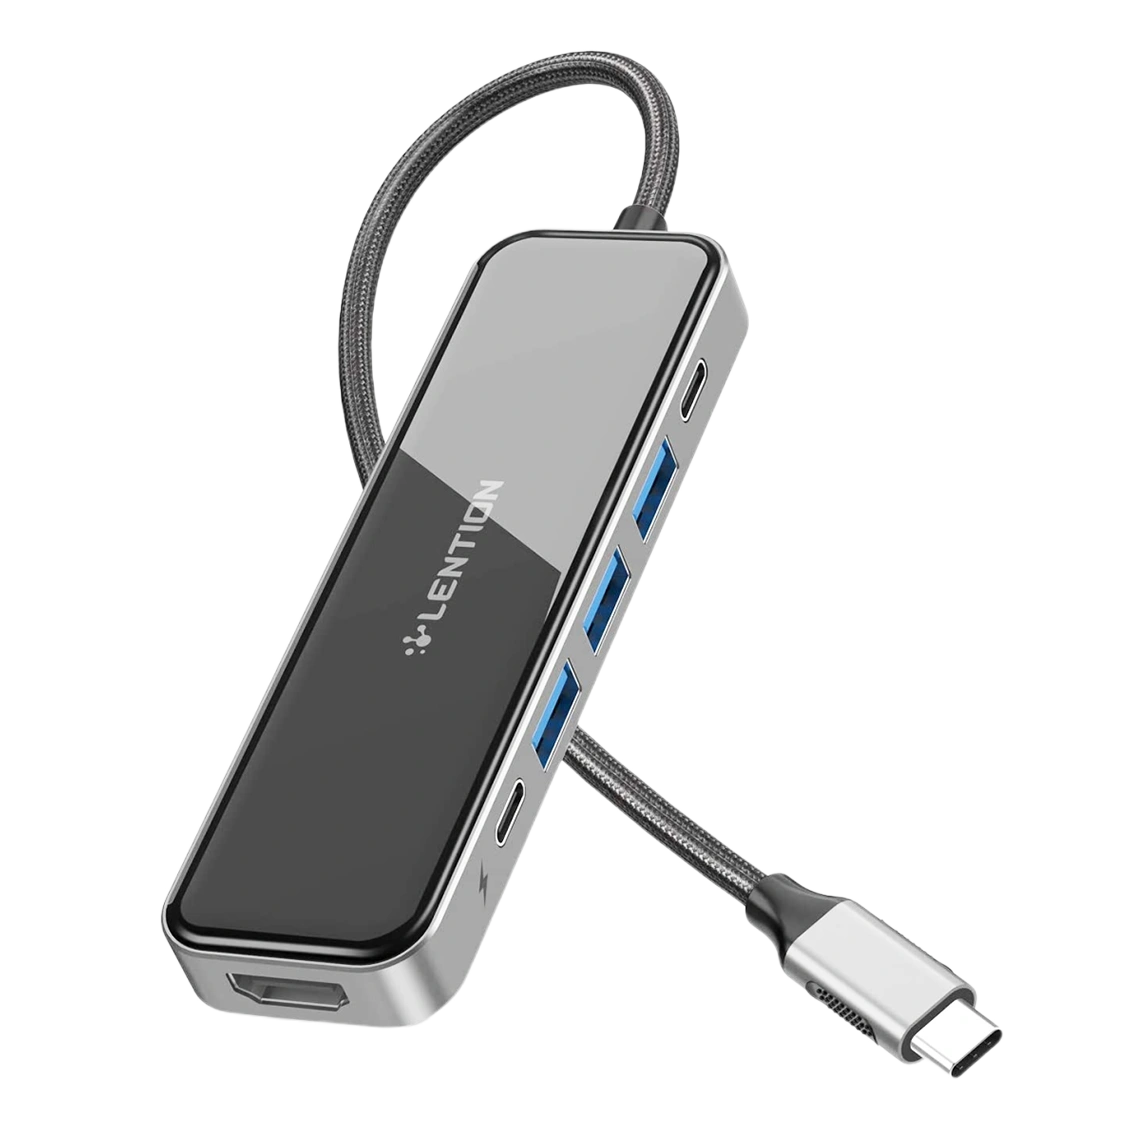 Lention USB-C to HDMI, USB 3.0 and USB-C CE35